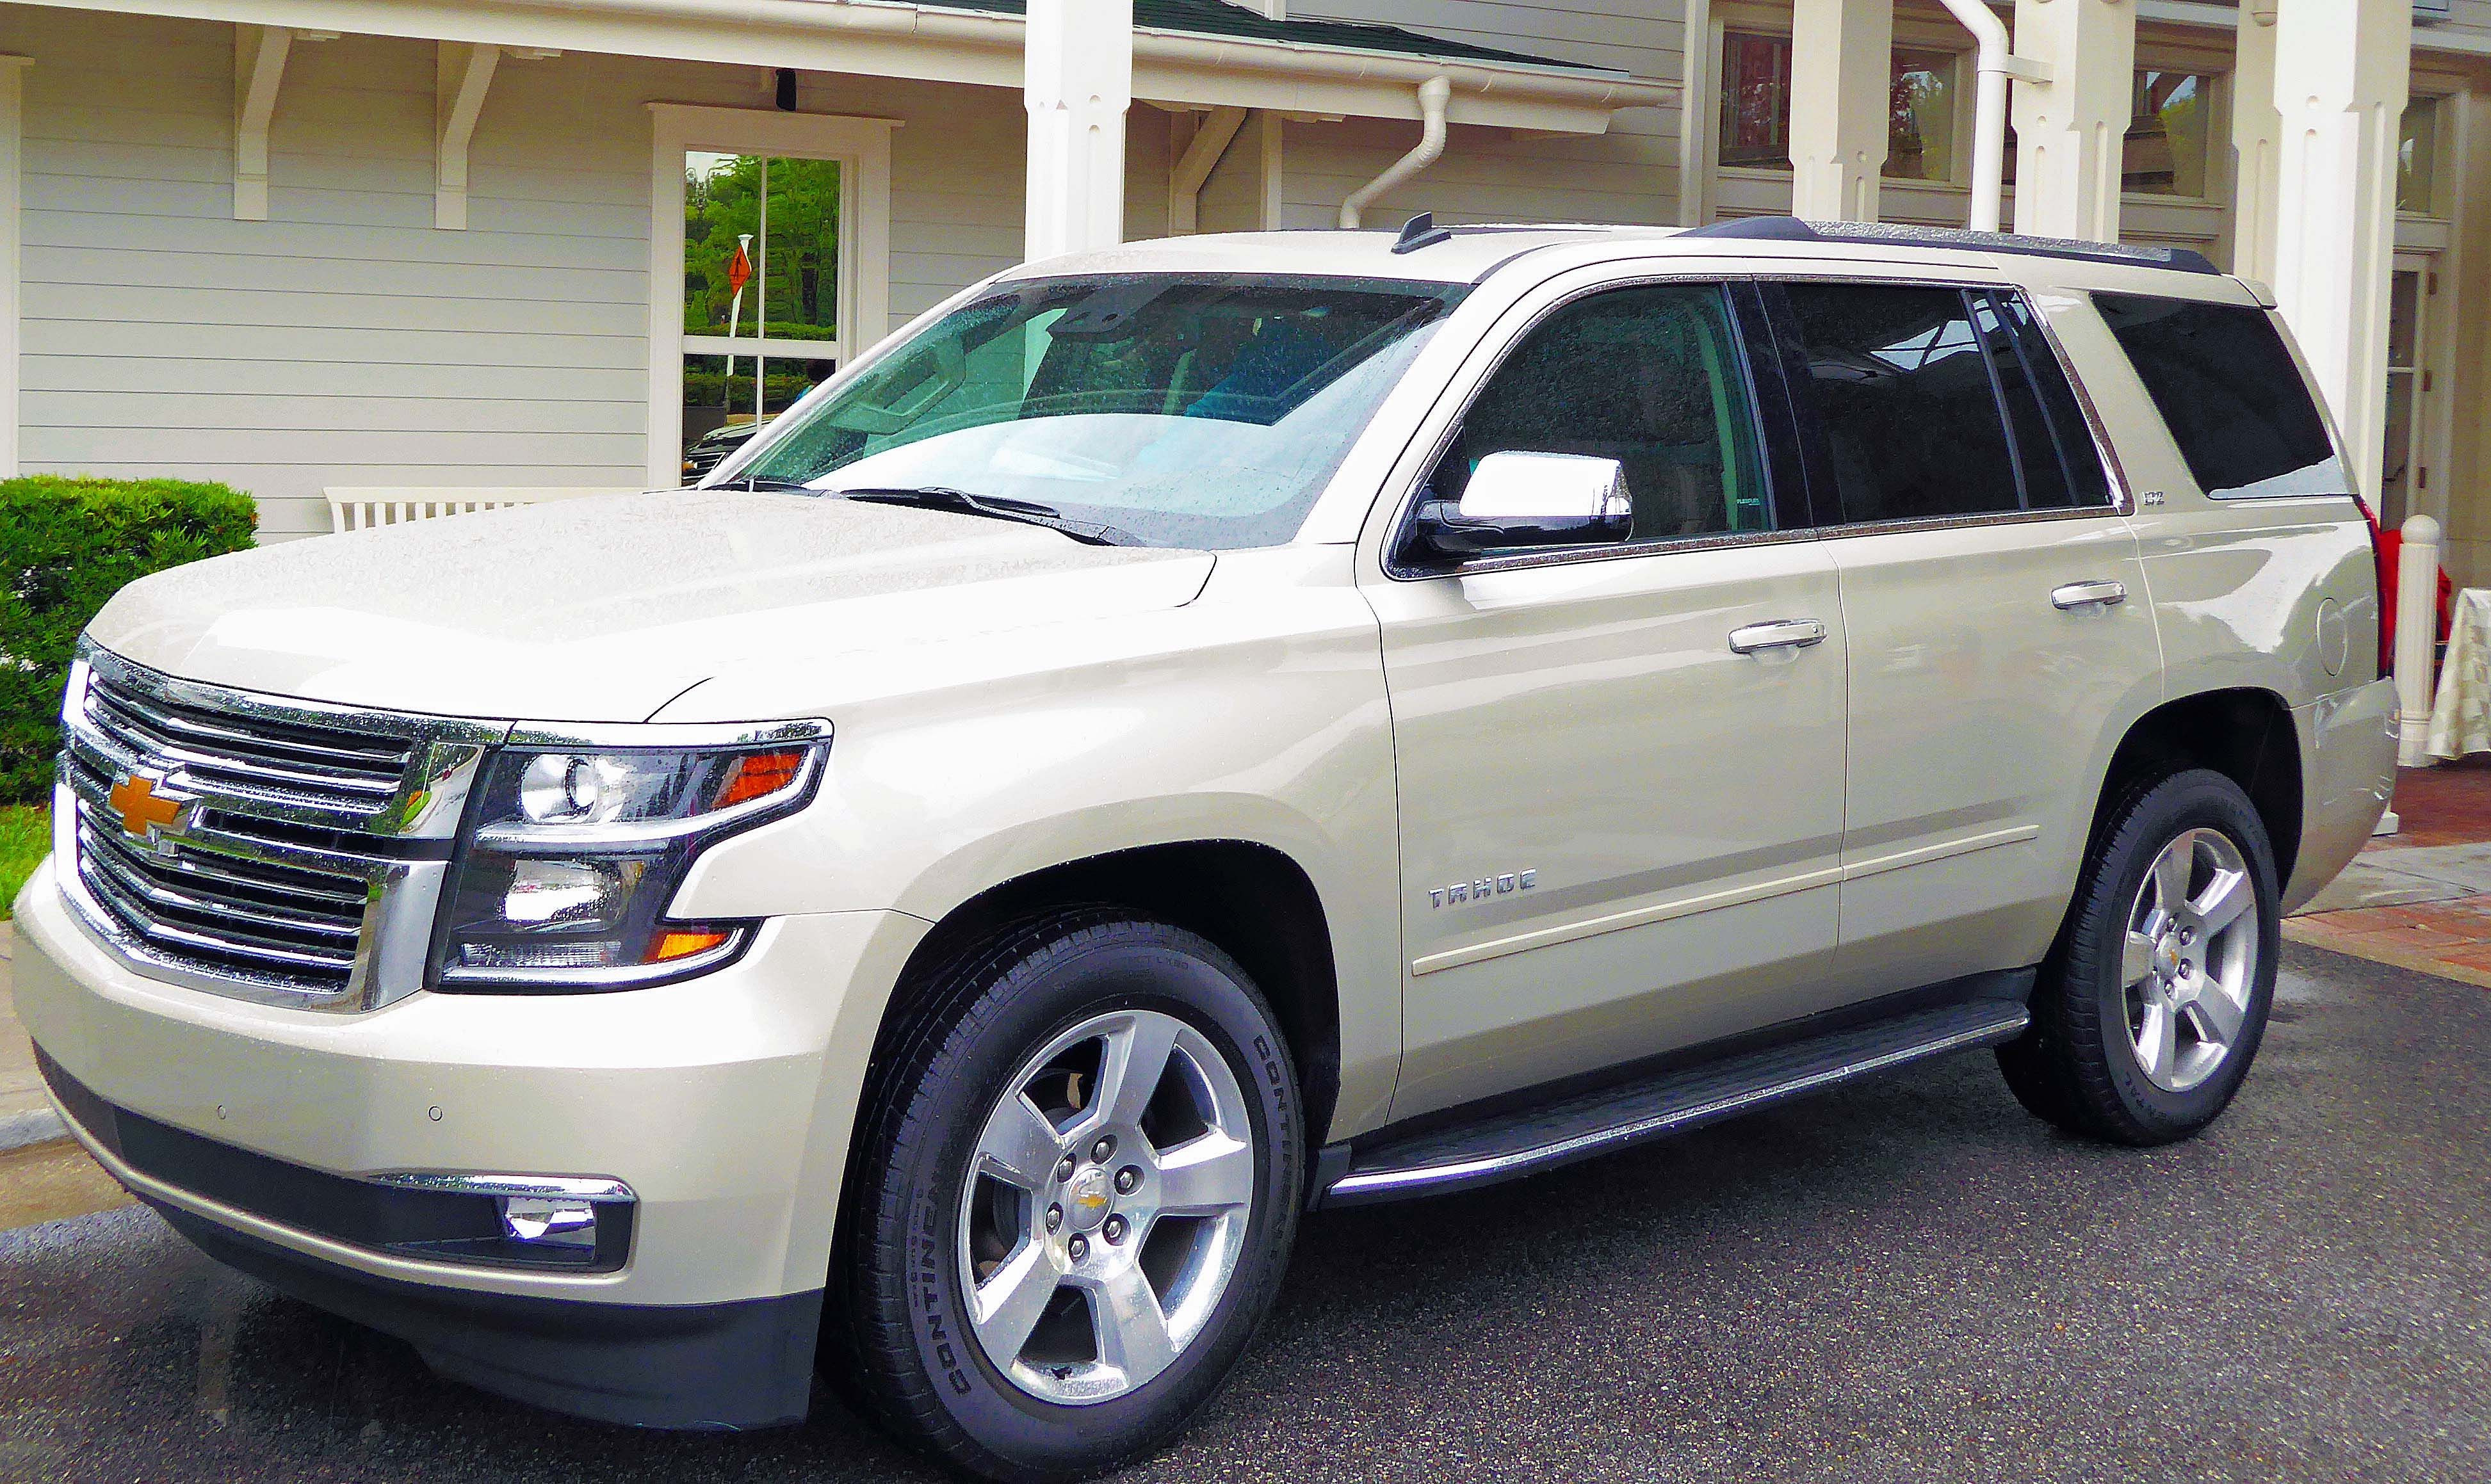 2015 Chevy Tahoe 4WD LTZ: Ride as Smooth as an Enchanted Mine Train | A Girls Guide to Cars